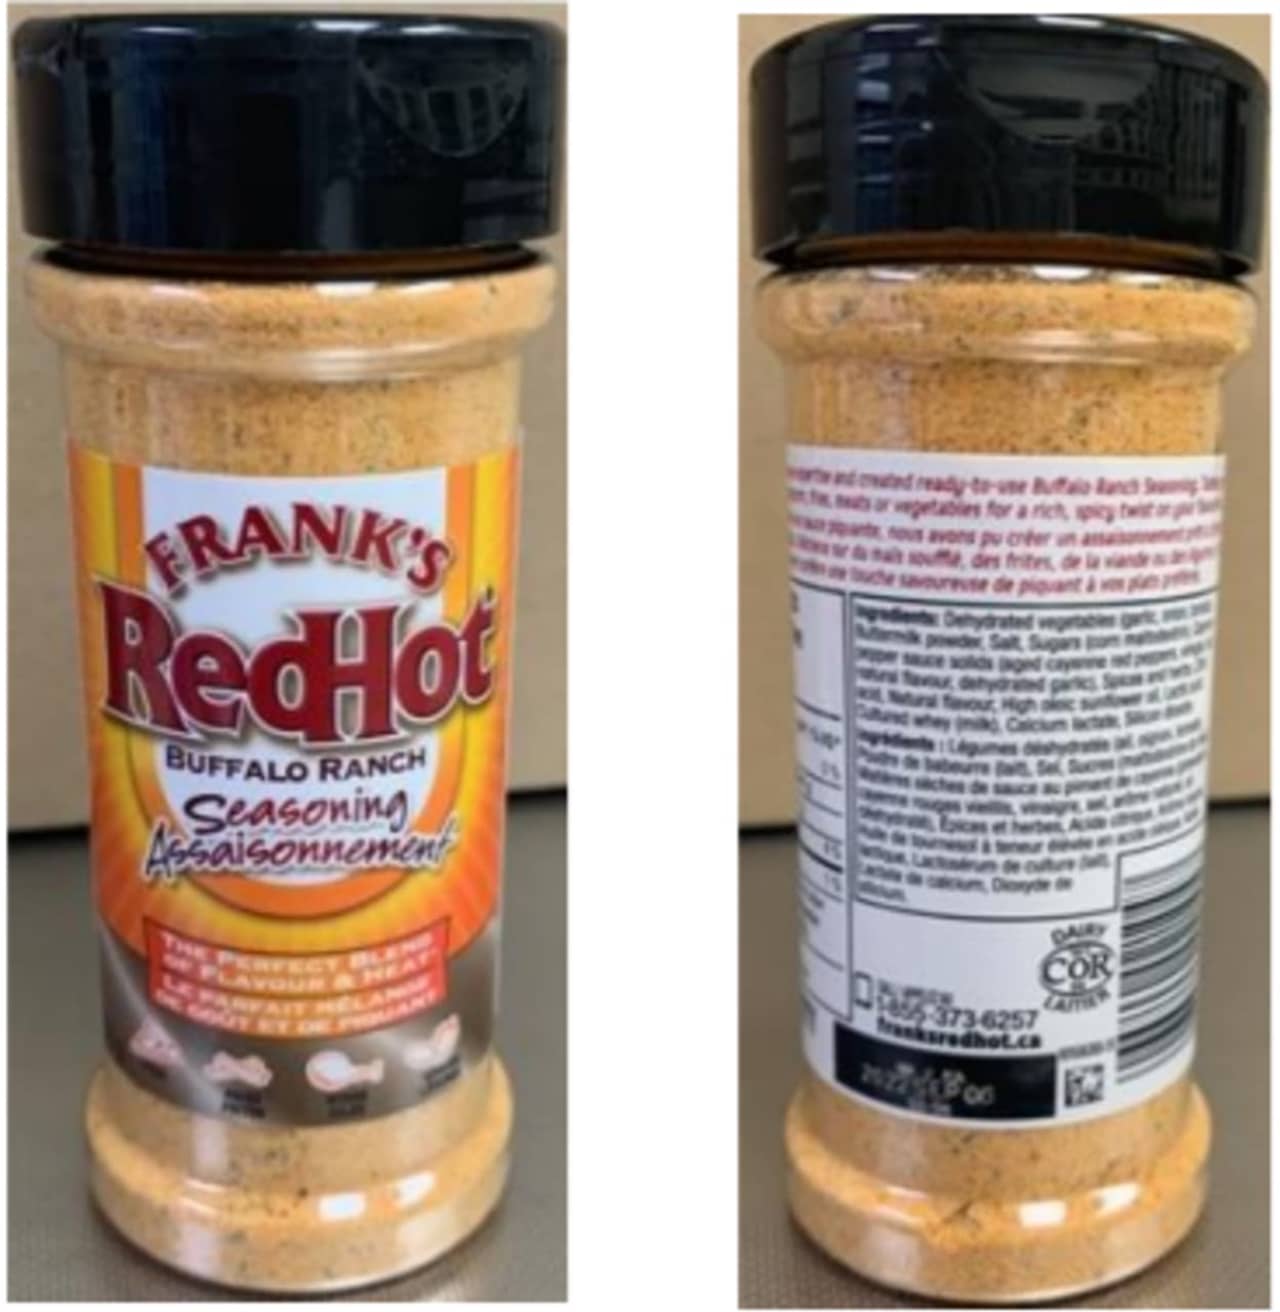 McCormick said customers should dispose of the recalled products and their containers and contact McCormick Consumer Affairs for a replacement or a refund.